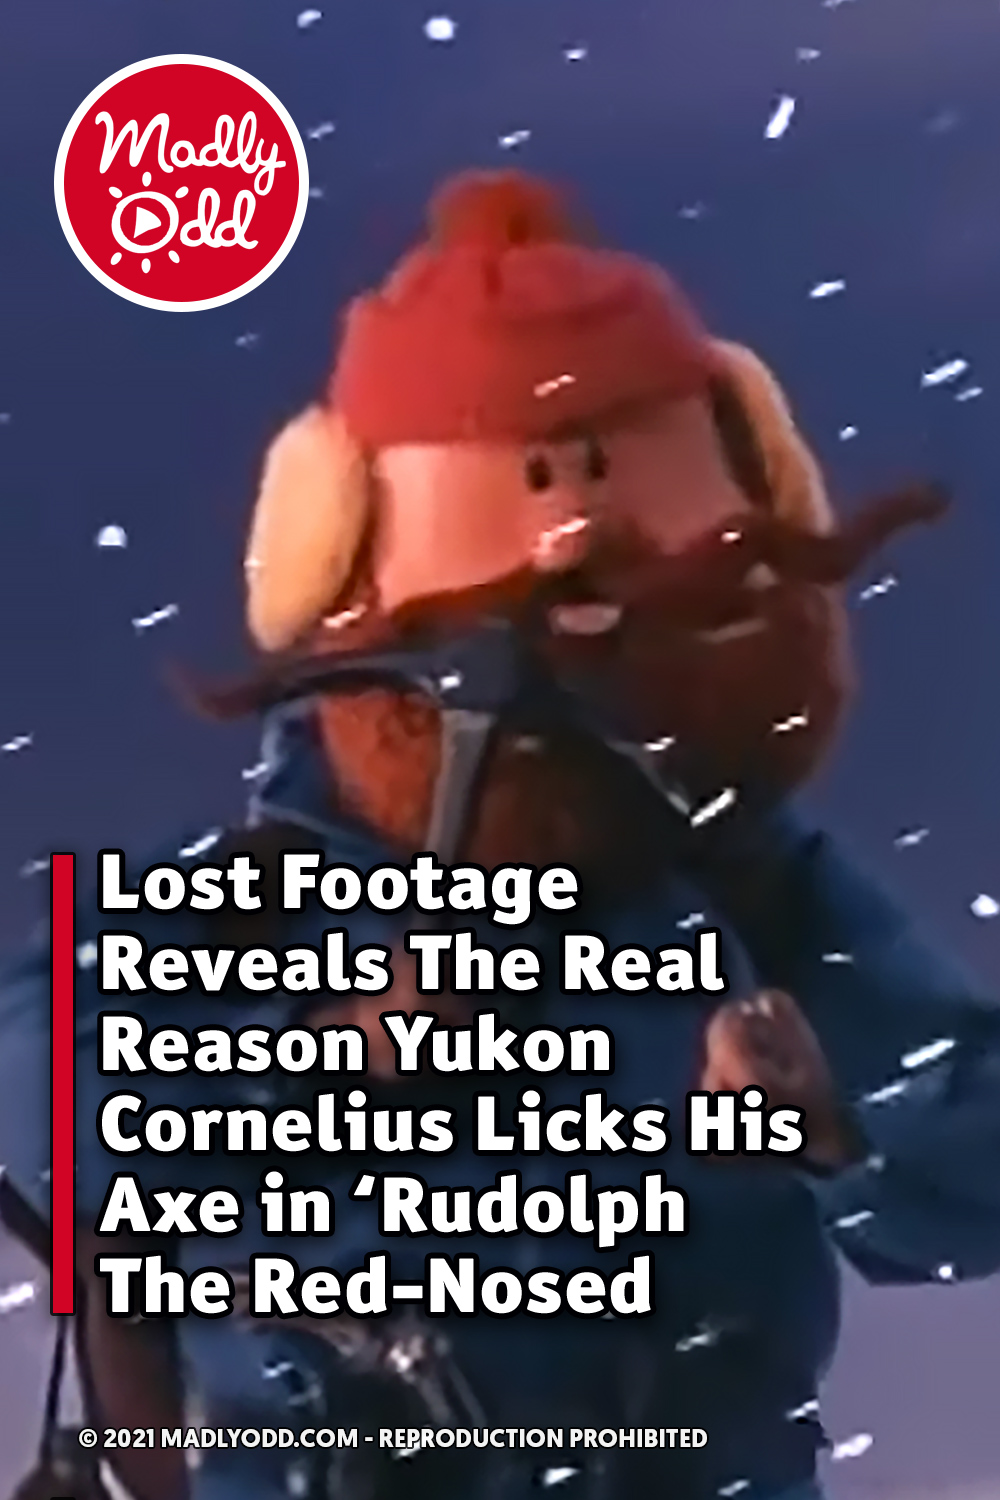 Lost Footage Reveals The Real Reason Yukon Cornelius Licks His Axe in \'Rudolph The Red-Nosed Reindeer\'